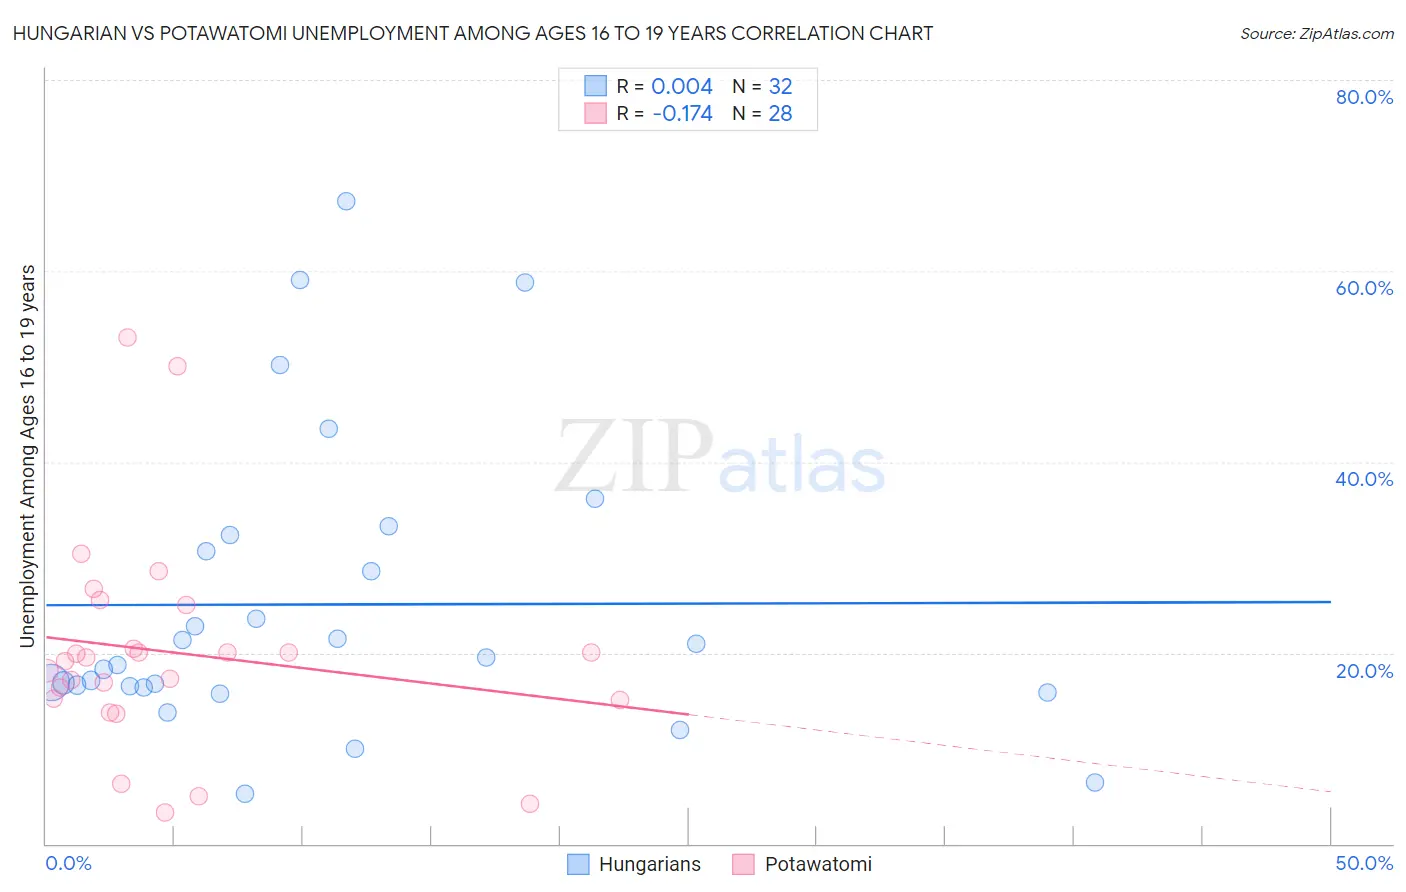 Hungarian vs Potawatomi Unemployment Among Ages 16 to 19 years